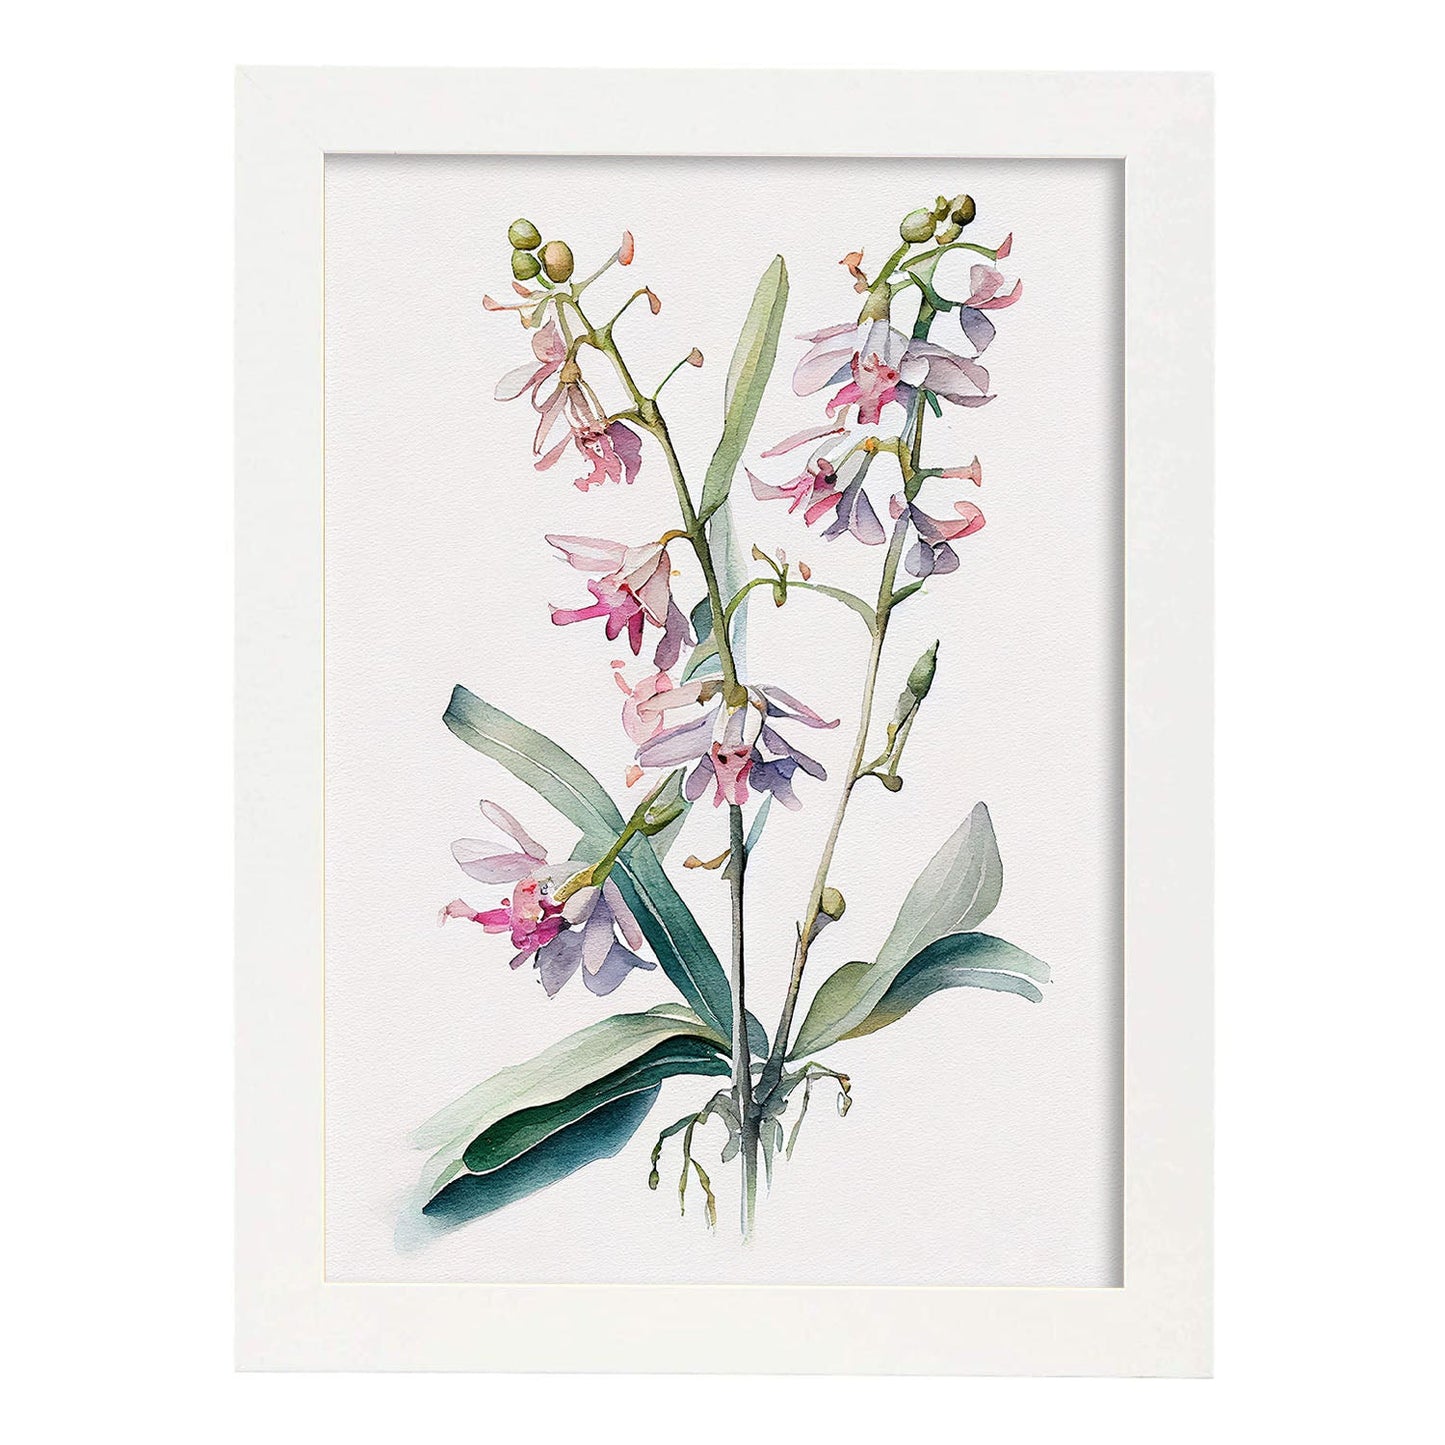 Nacnic watercolor minmal Orchid_1. Aesthetic Wall Art Prints for Bedroom or Living Room Design.-Artwork-Nacnic-A4-Marco Blanco-Nacnic Estudio SL